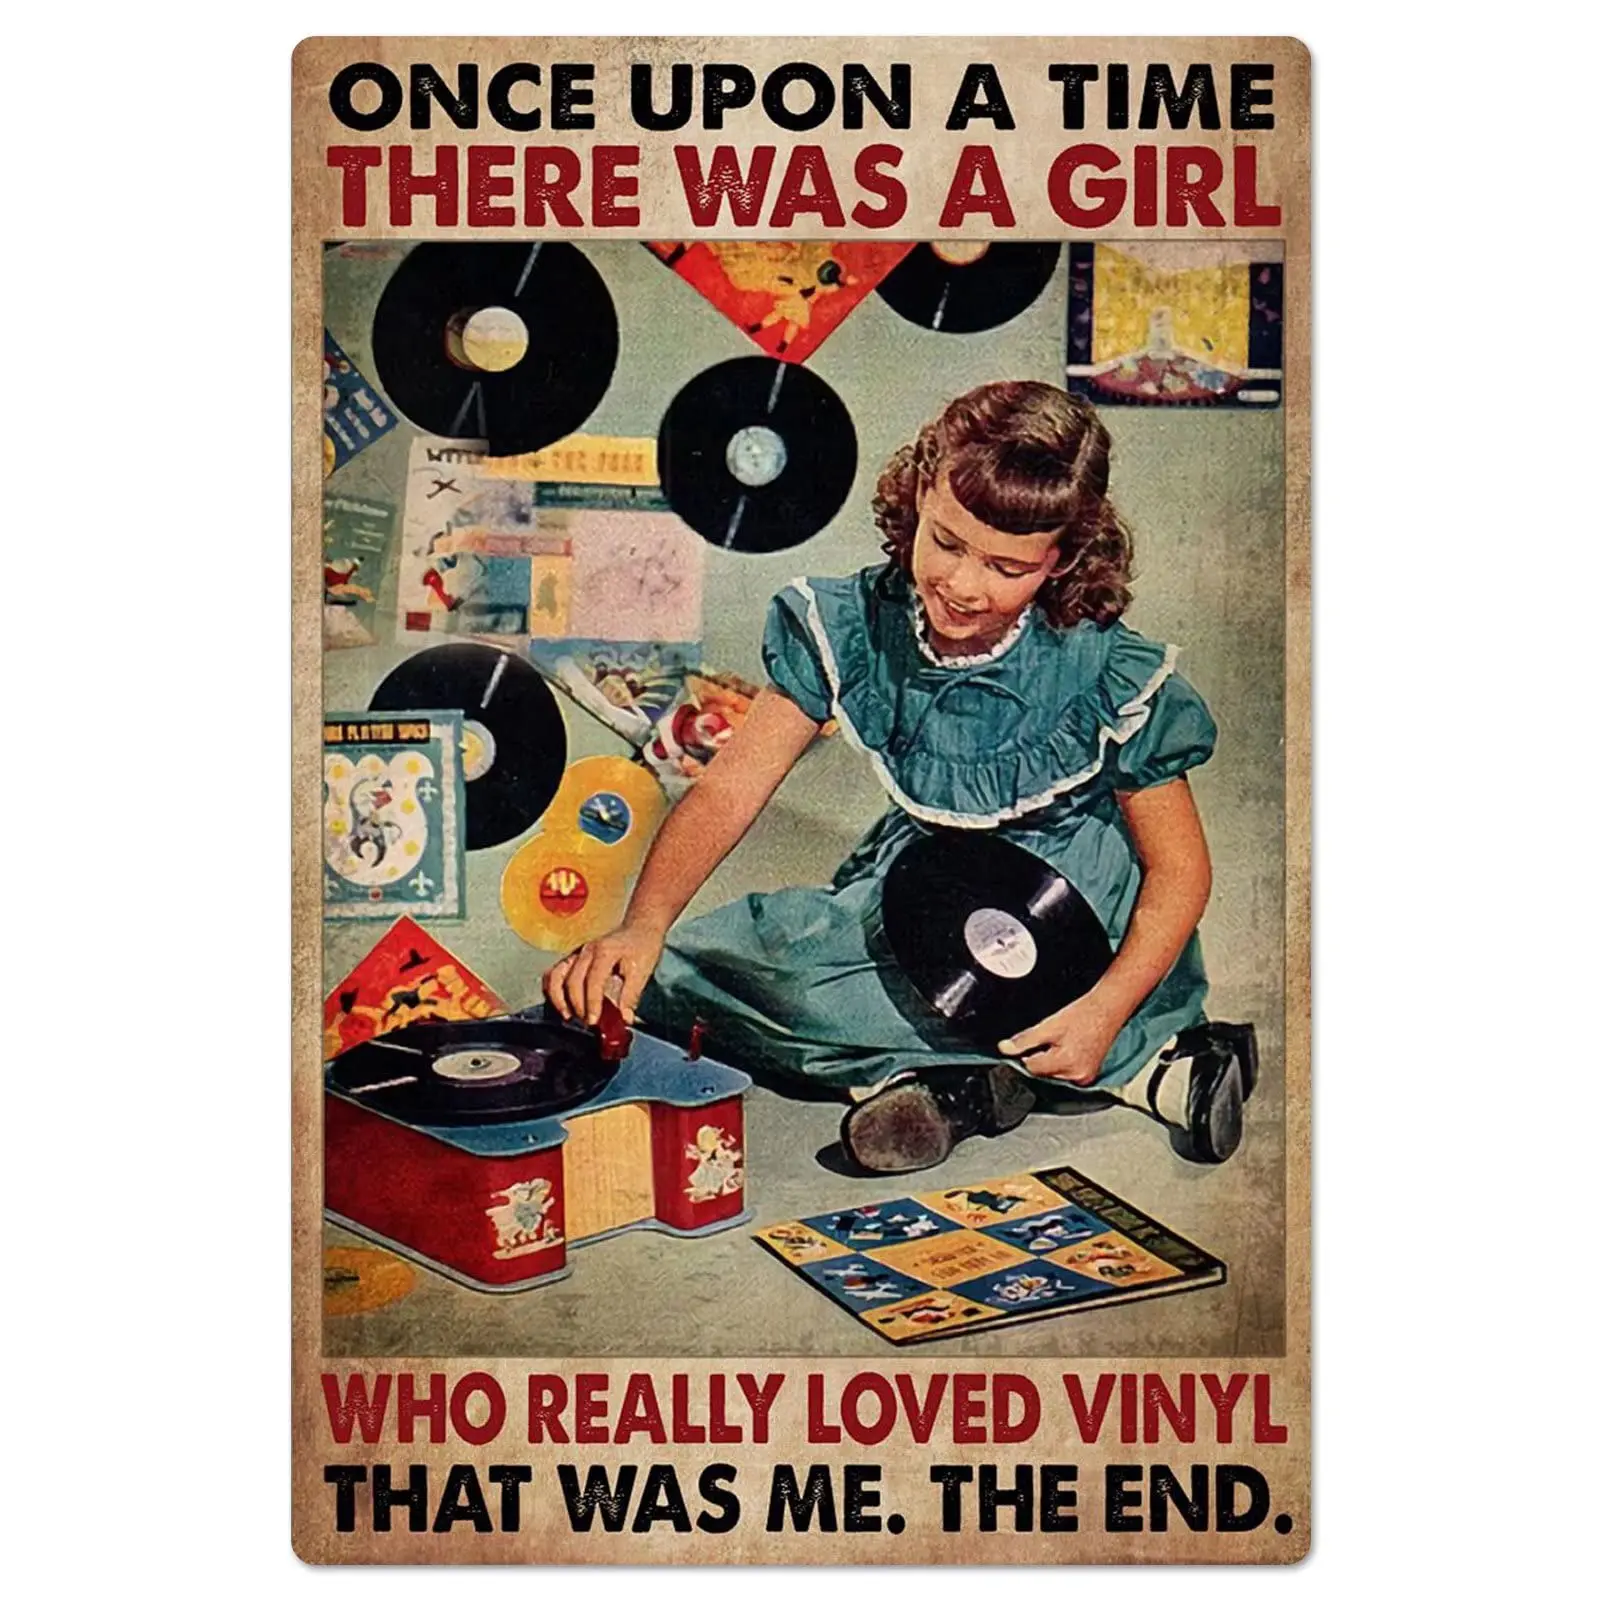 

Once Upon A Time There Was A Girl Who Really Loved Vinyl It Was Me Vintage metal Board Hanging Wall Decor Bar Club House 8x12 In